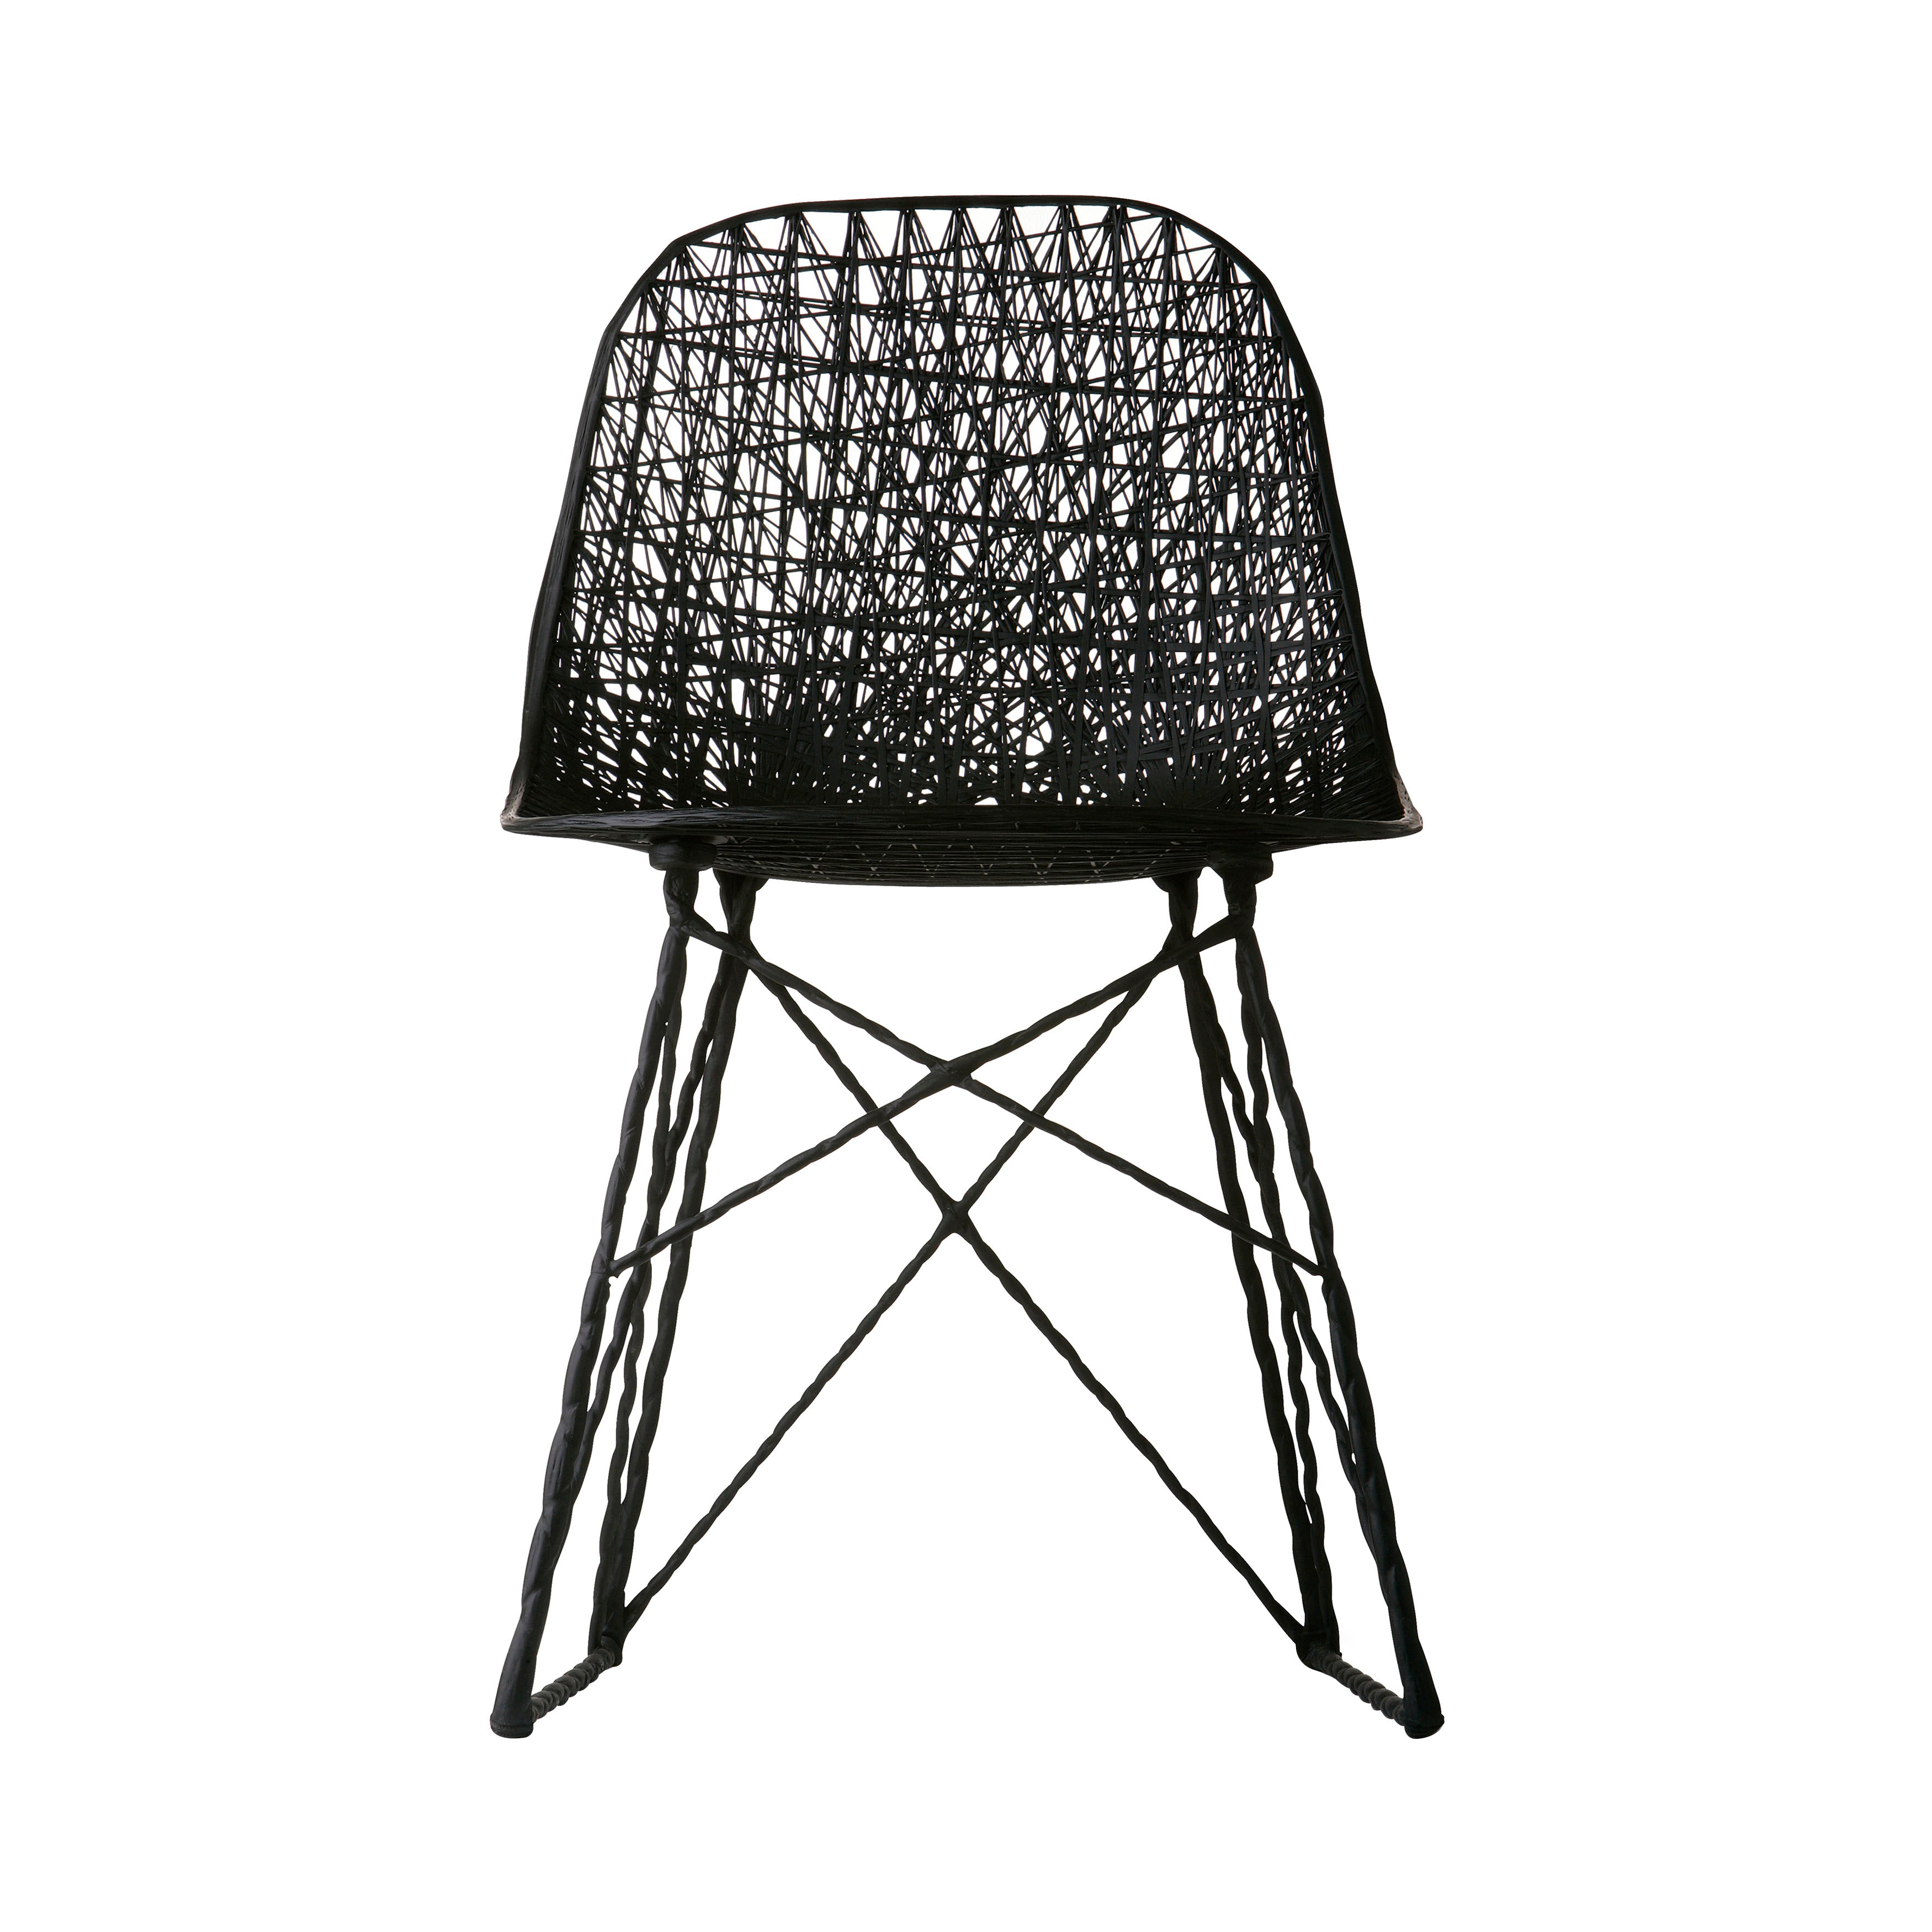 Carbon Chair: Without Seat Pad